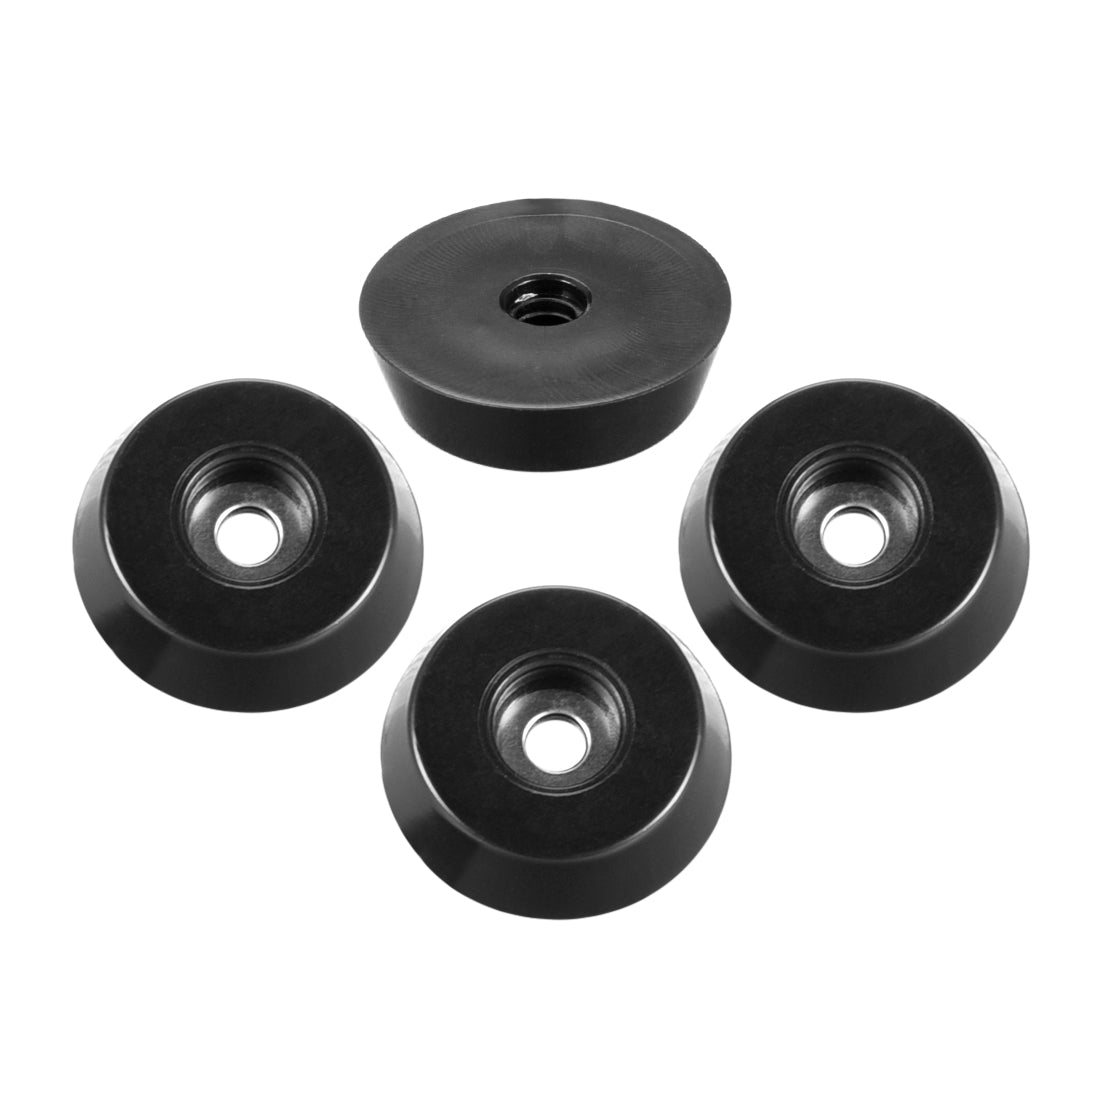 uxcell Uxcell Rubber Feet Bumpers Pads D18x15xH5mm Black 4pcs